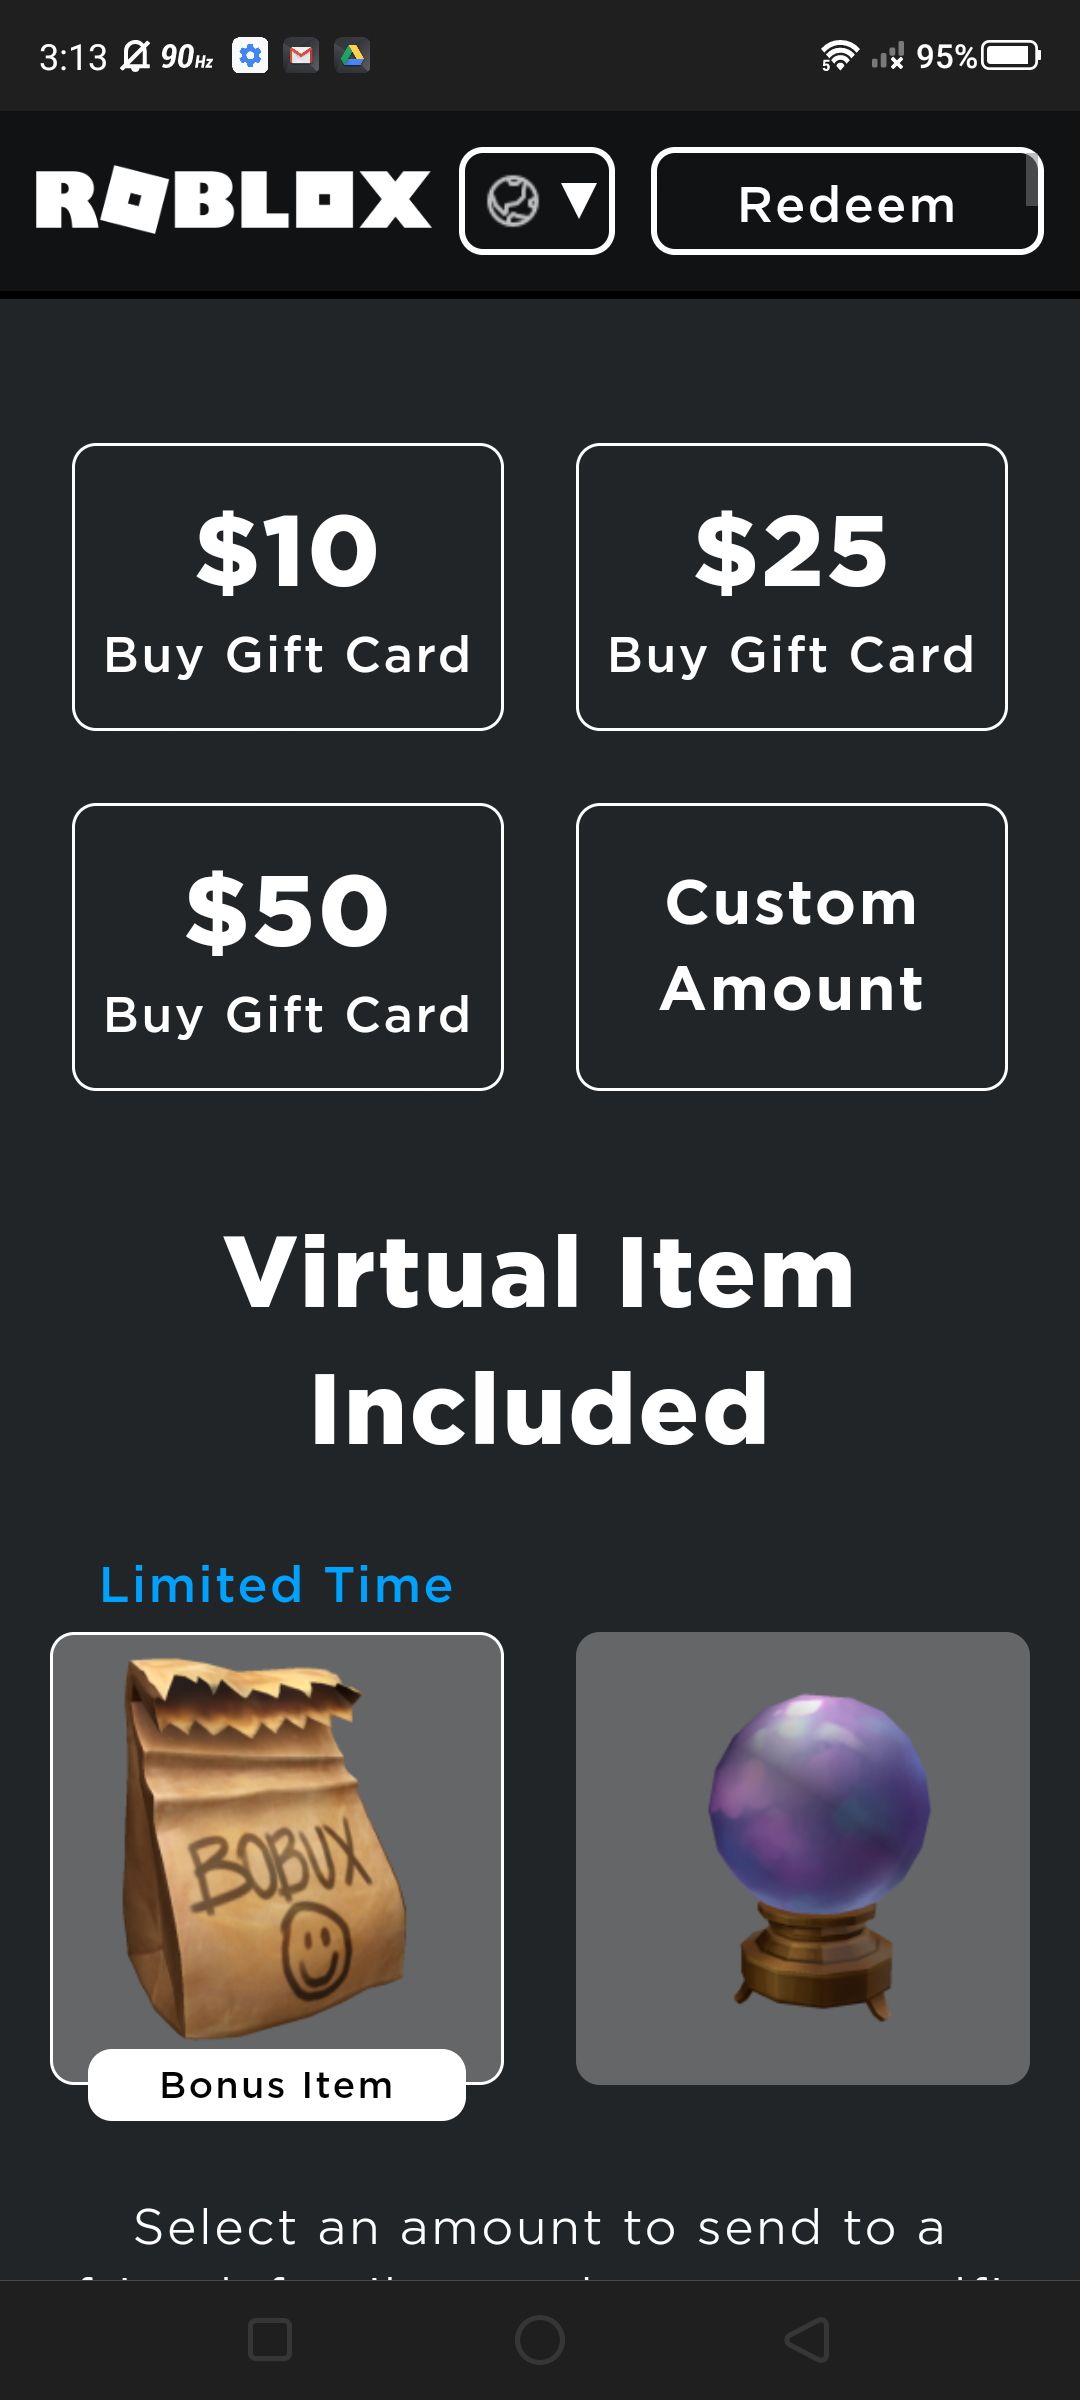 Roblox-Purchase-1